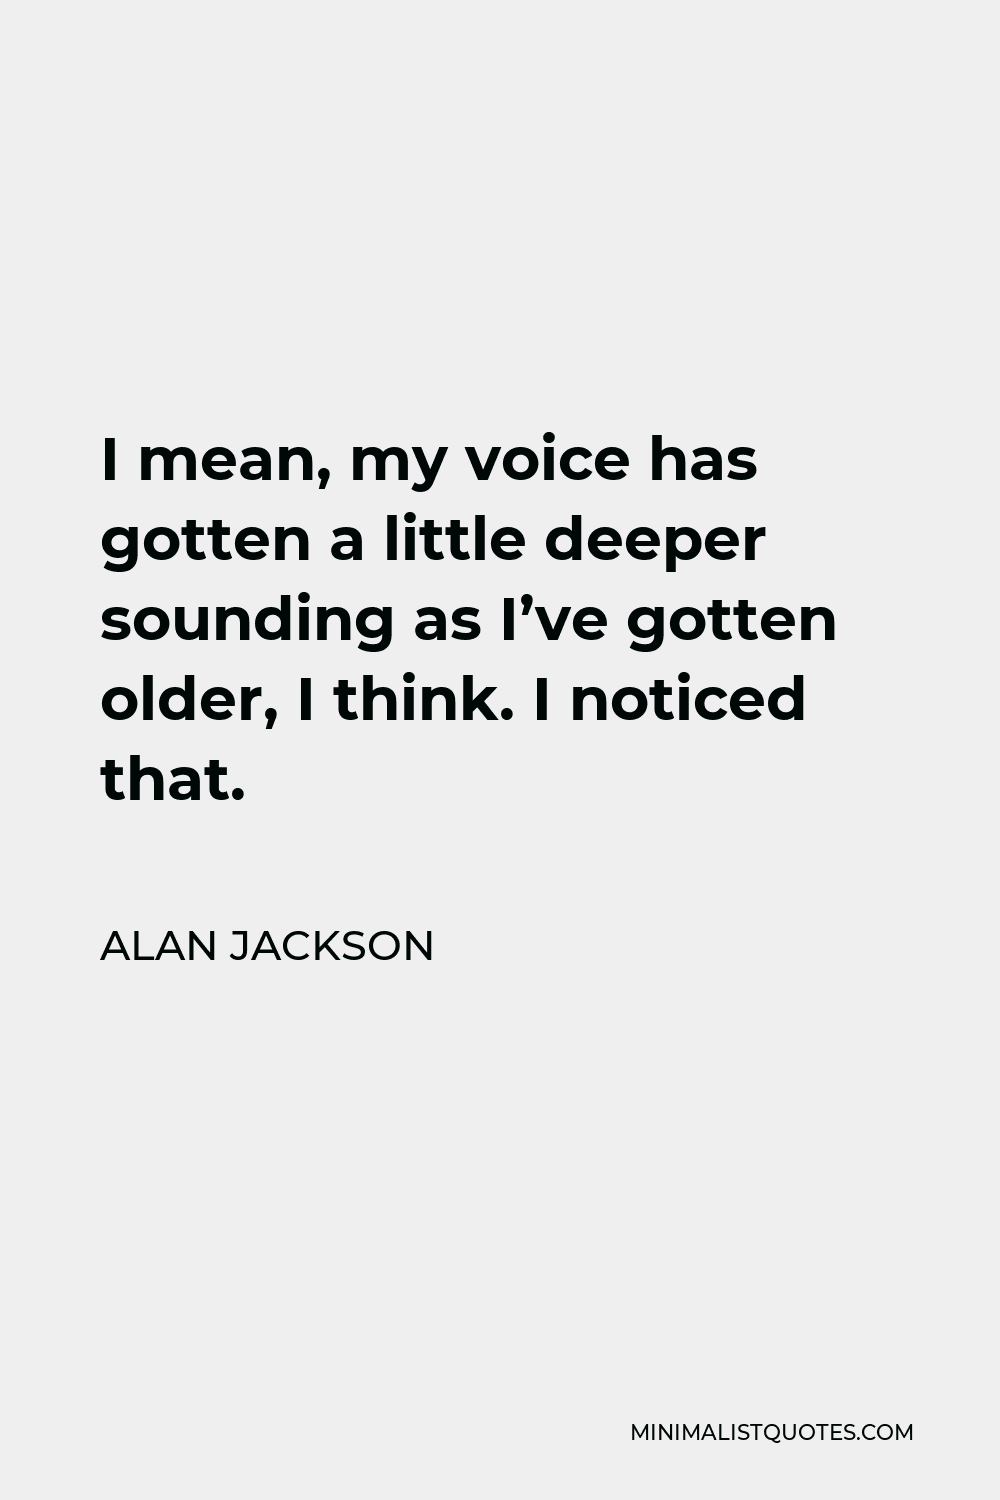 Alan Jackson Quote - I mean, my voice has gotten a little deeper sounding as I’ve gotten older, I think. I noticed that.